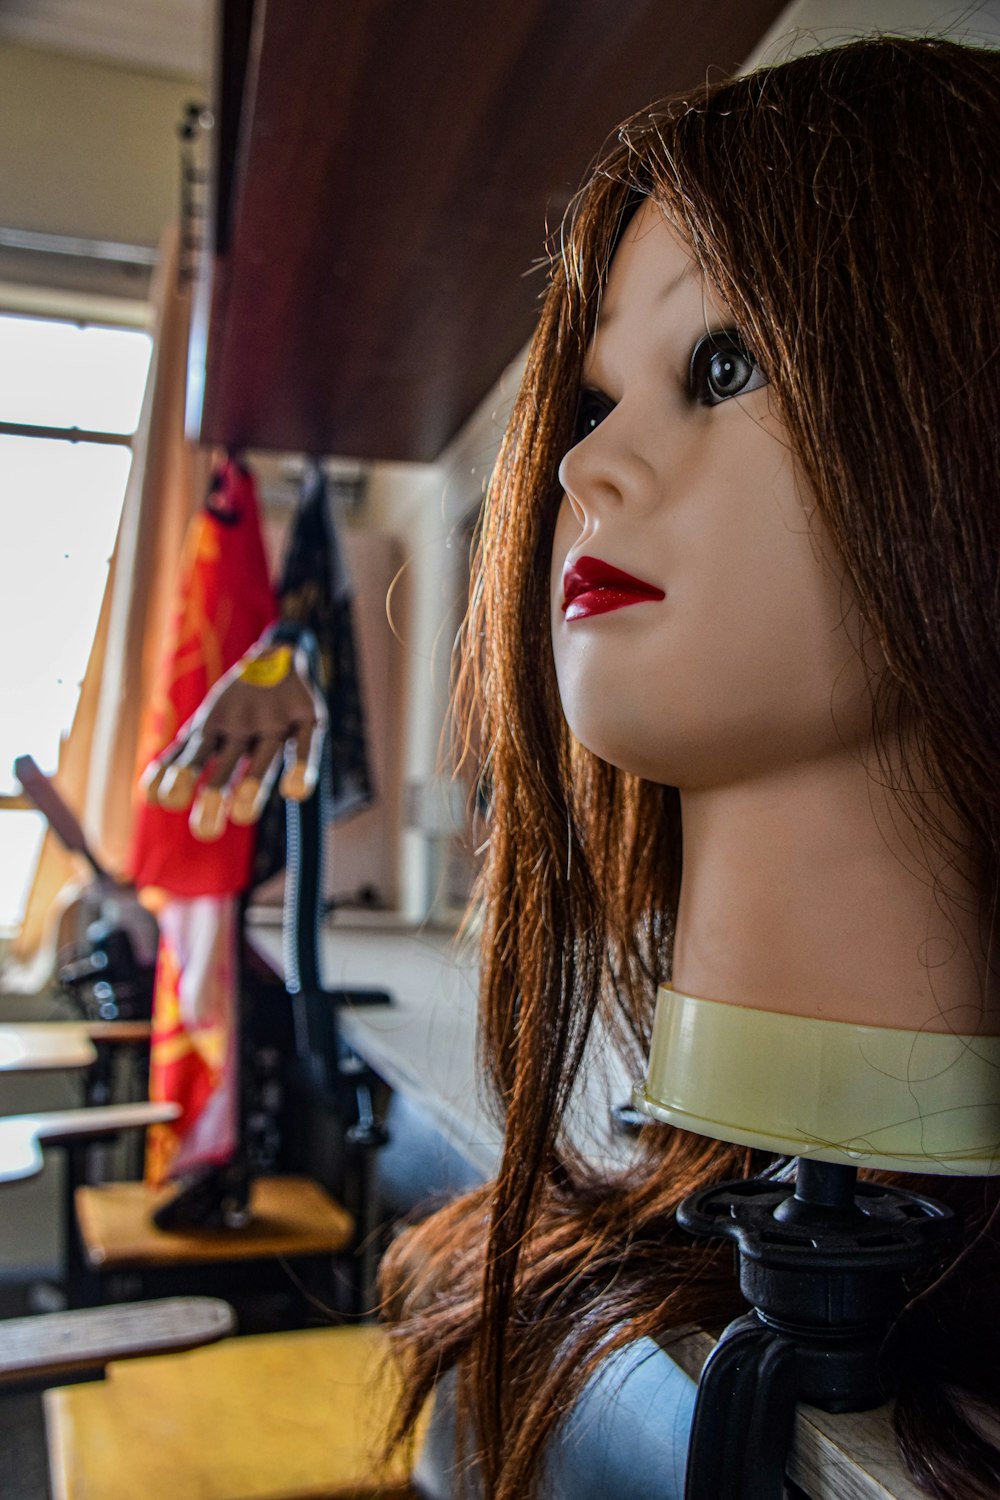 a close up of a mannequin's head on a shelf